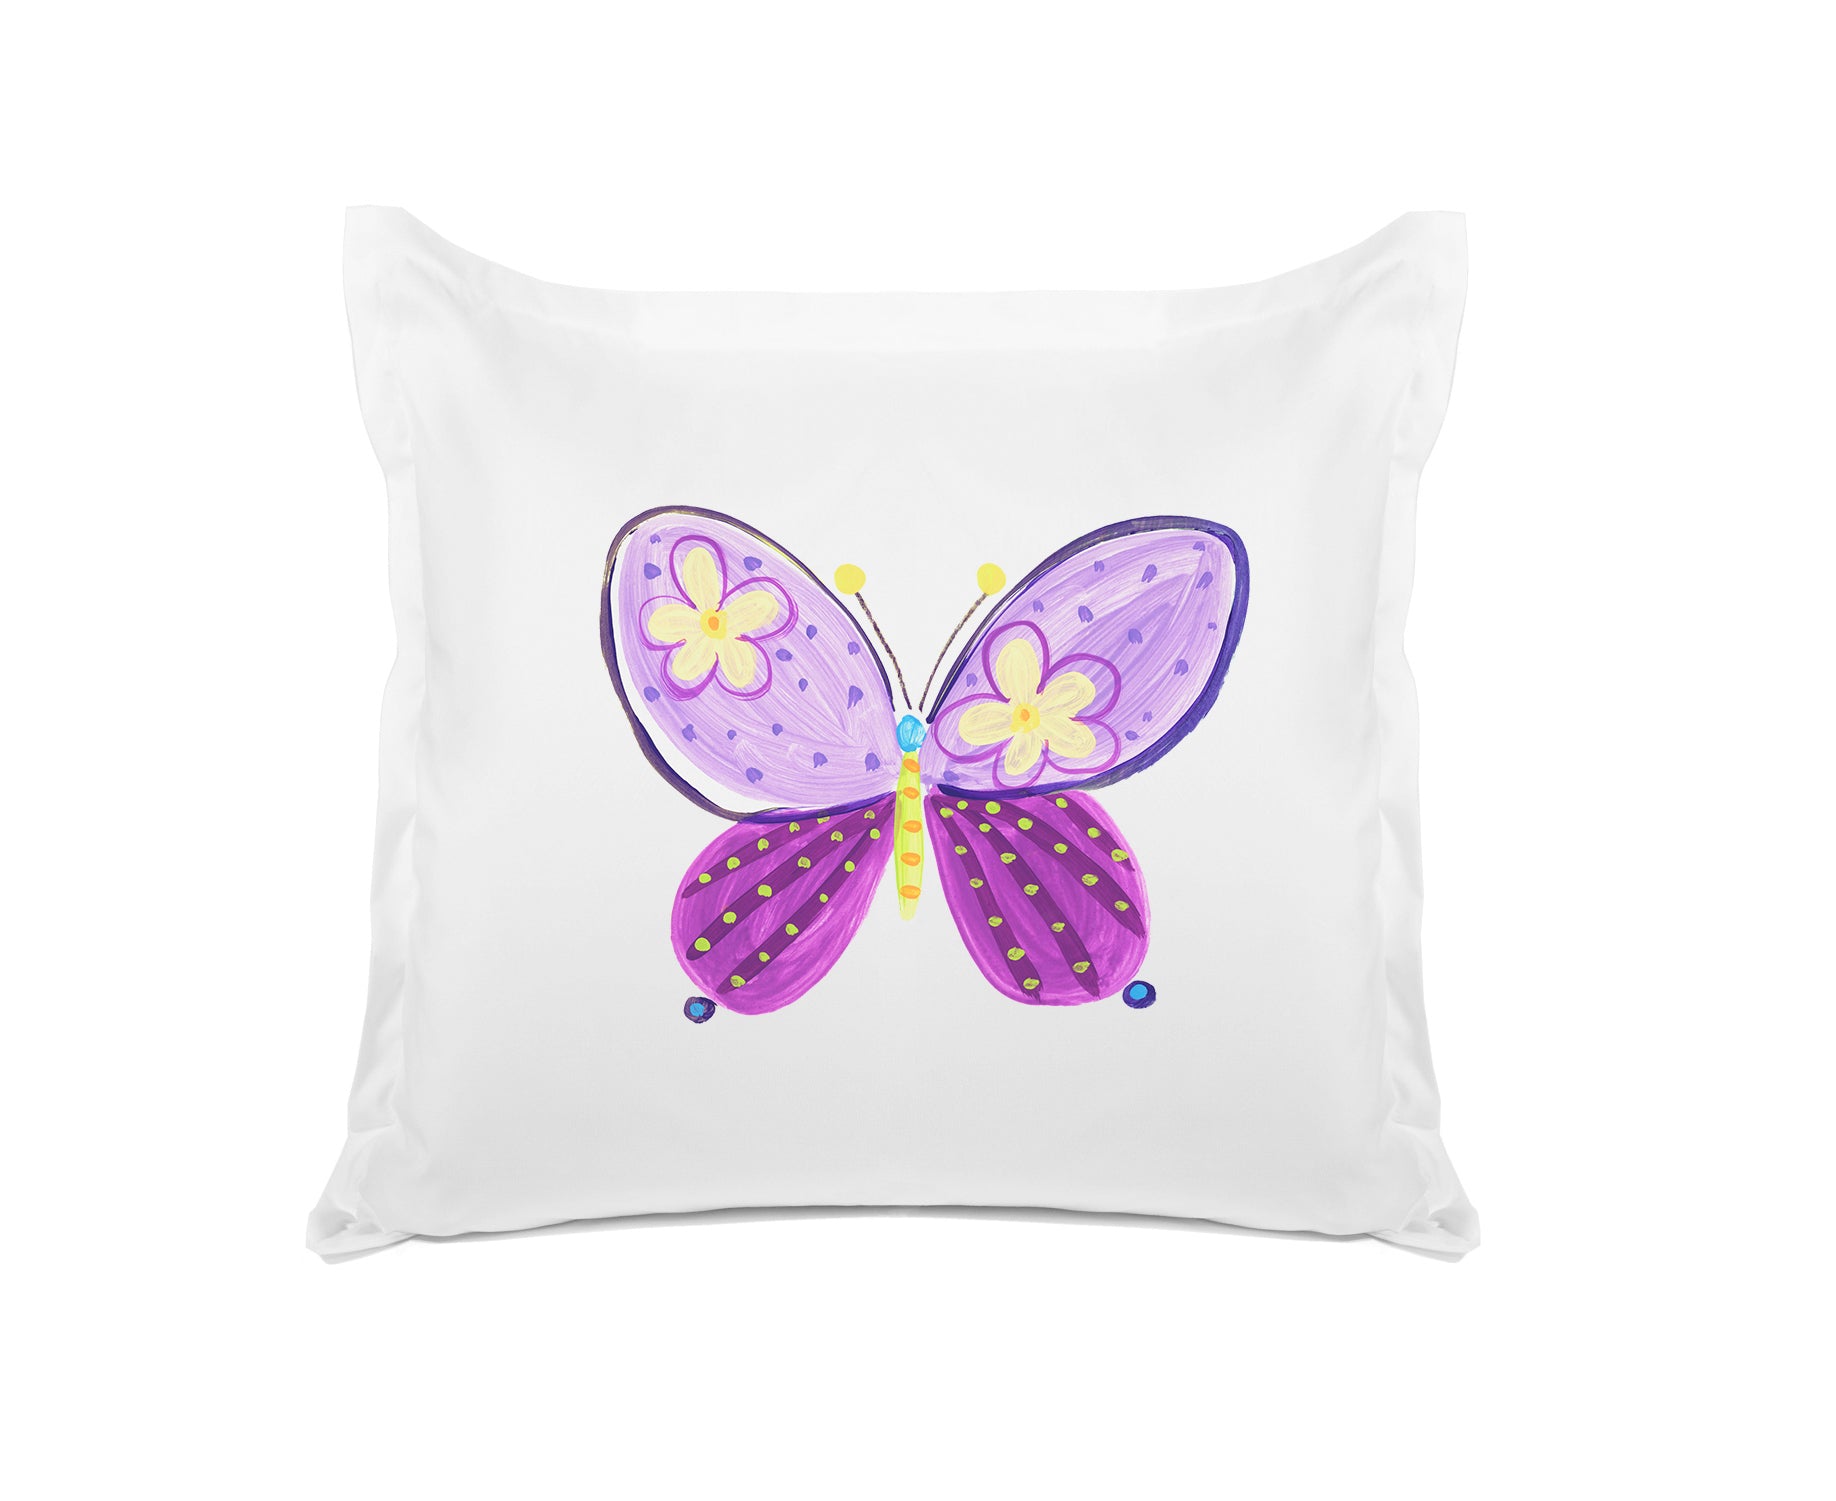 Madam Butterfly - Personalized Kids Pillowcase Collection-Di Lewis